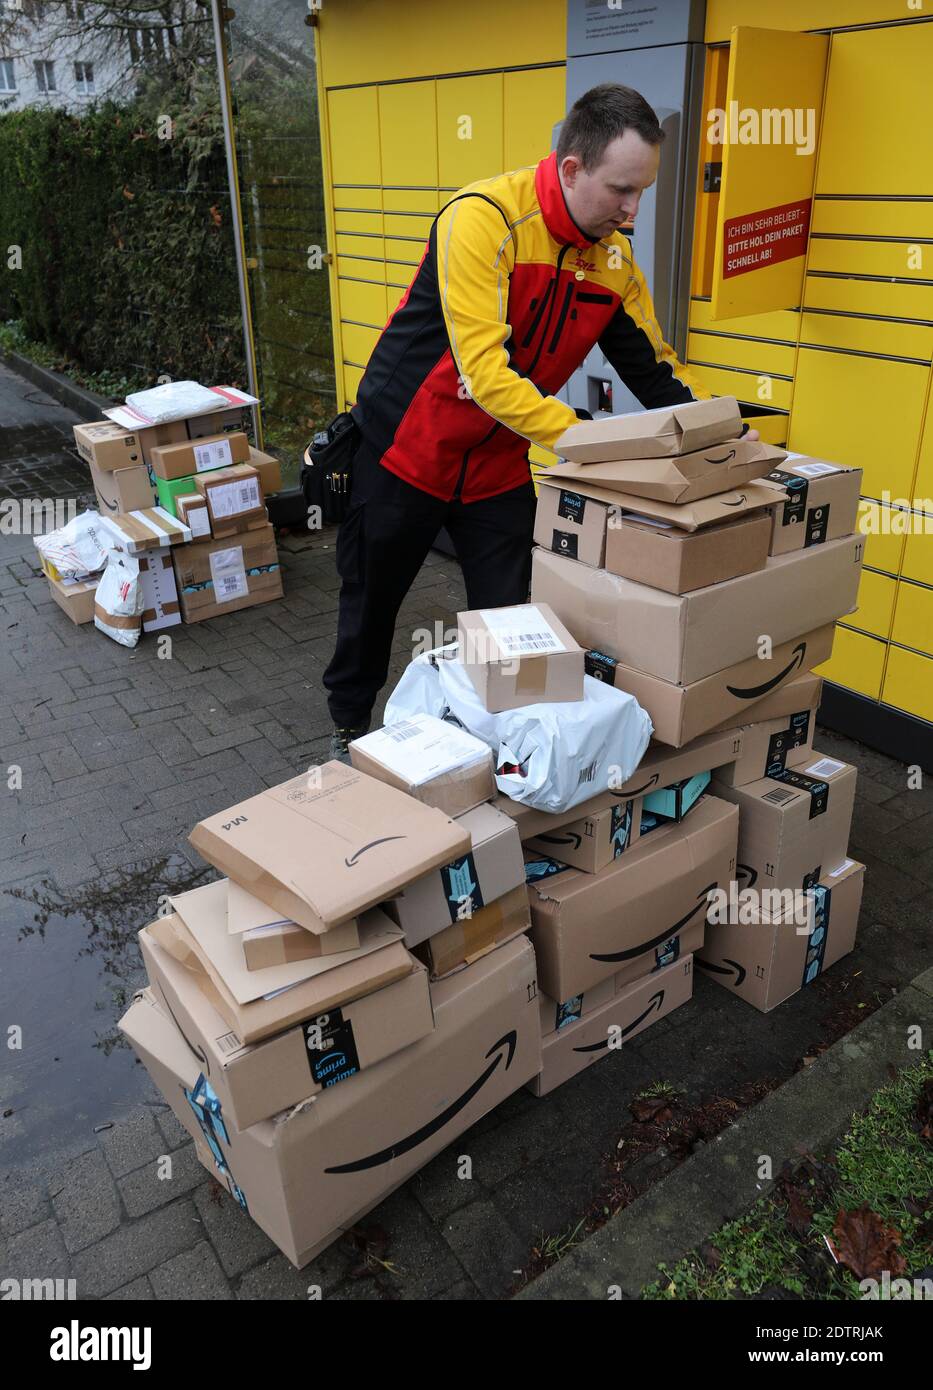 22 December 2020, Mecklenburg-Western Pomerania, Rostock: In front of a DHL Packstation, Matthias Peters has stacked up parcel shipments that he has either taken from the station or has yet to put in. Last week, Swiss Post handled 61 million parcels, the largest volume in the company's history, which was around 20 percent more than in the strongest week of 2019. Photo: Bernd Wüstneck/dpa-Zentralbild/dpa - ATTENTION: Addresses on packages pixelated for privacy reasons Stock Photo